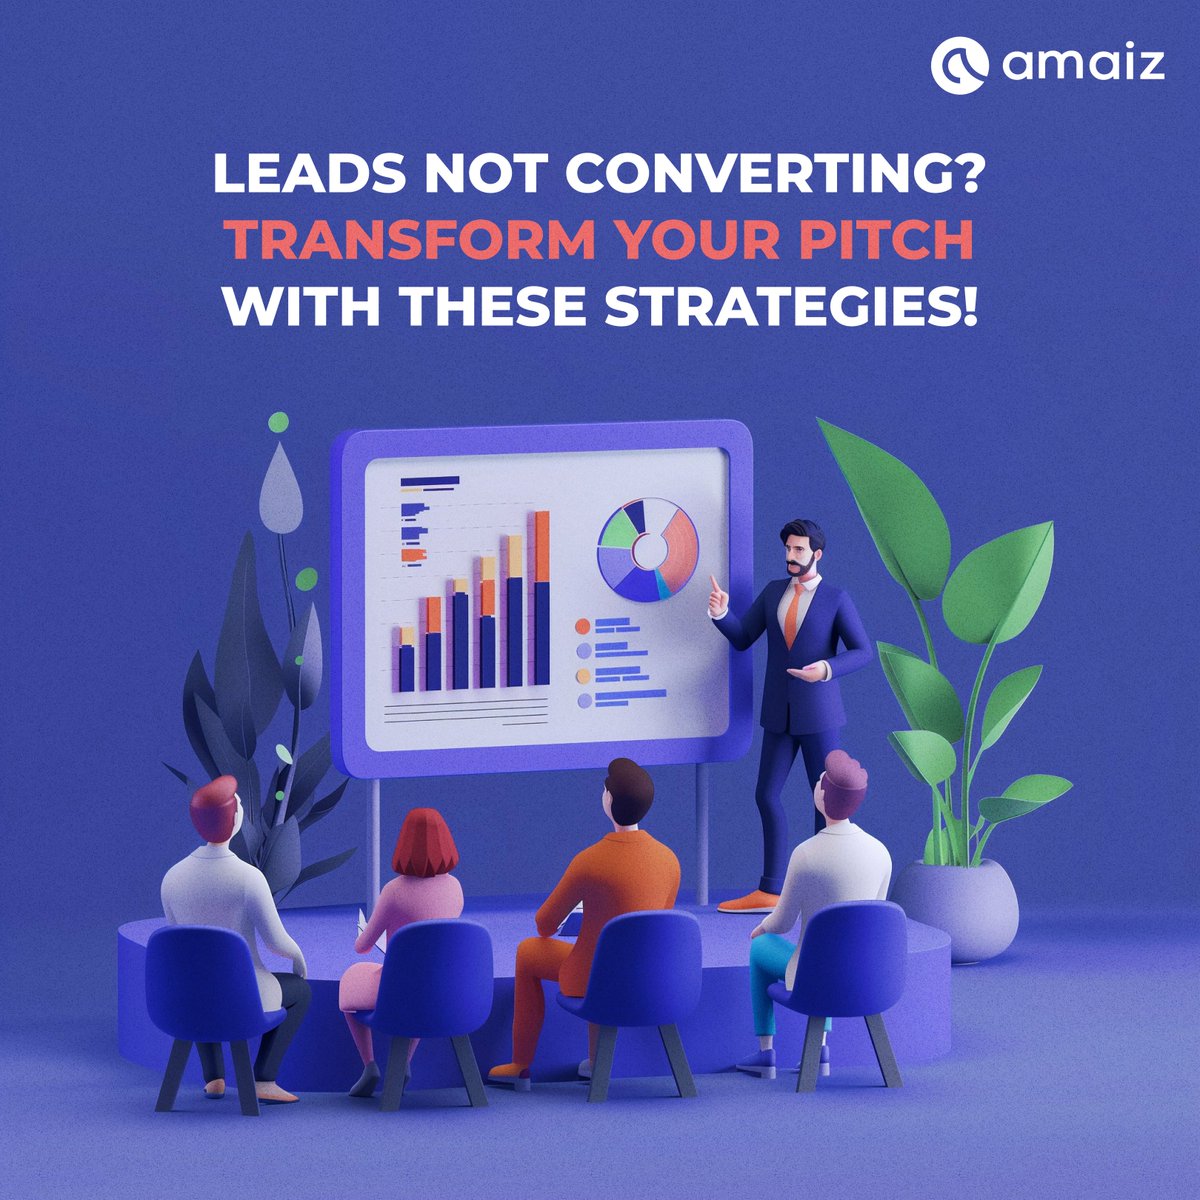 Leads Not Converting? Adjust your pitch:
🫂Know Your Audience
🪝Start with a Hook
💪Practice 
💅Showcase Your Unique Sell
 🙅‍♀️Address Objections
⭕End with a Call to Action
#Amaiz #Money #StartUps #Finance #Banking #OnlineBanking #bankingsolutions #bankaccounts #virtualcards #iban